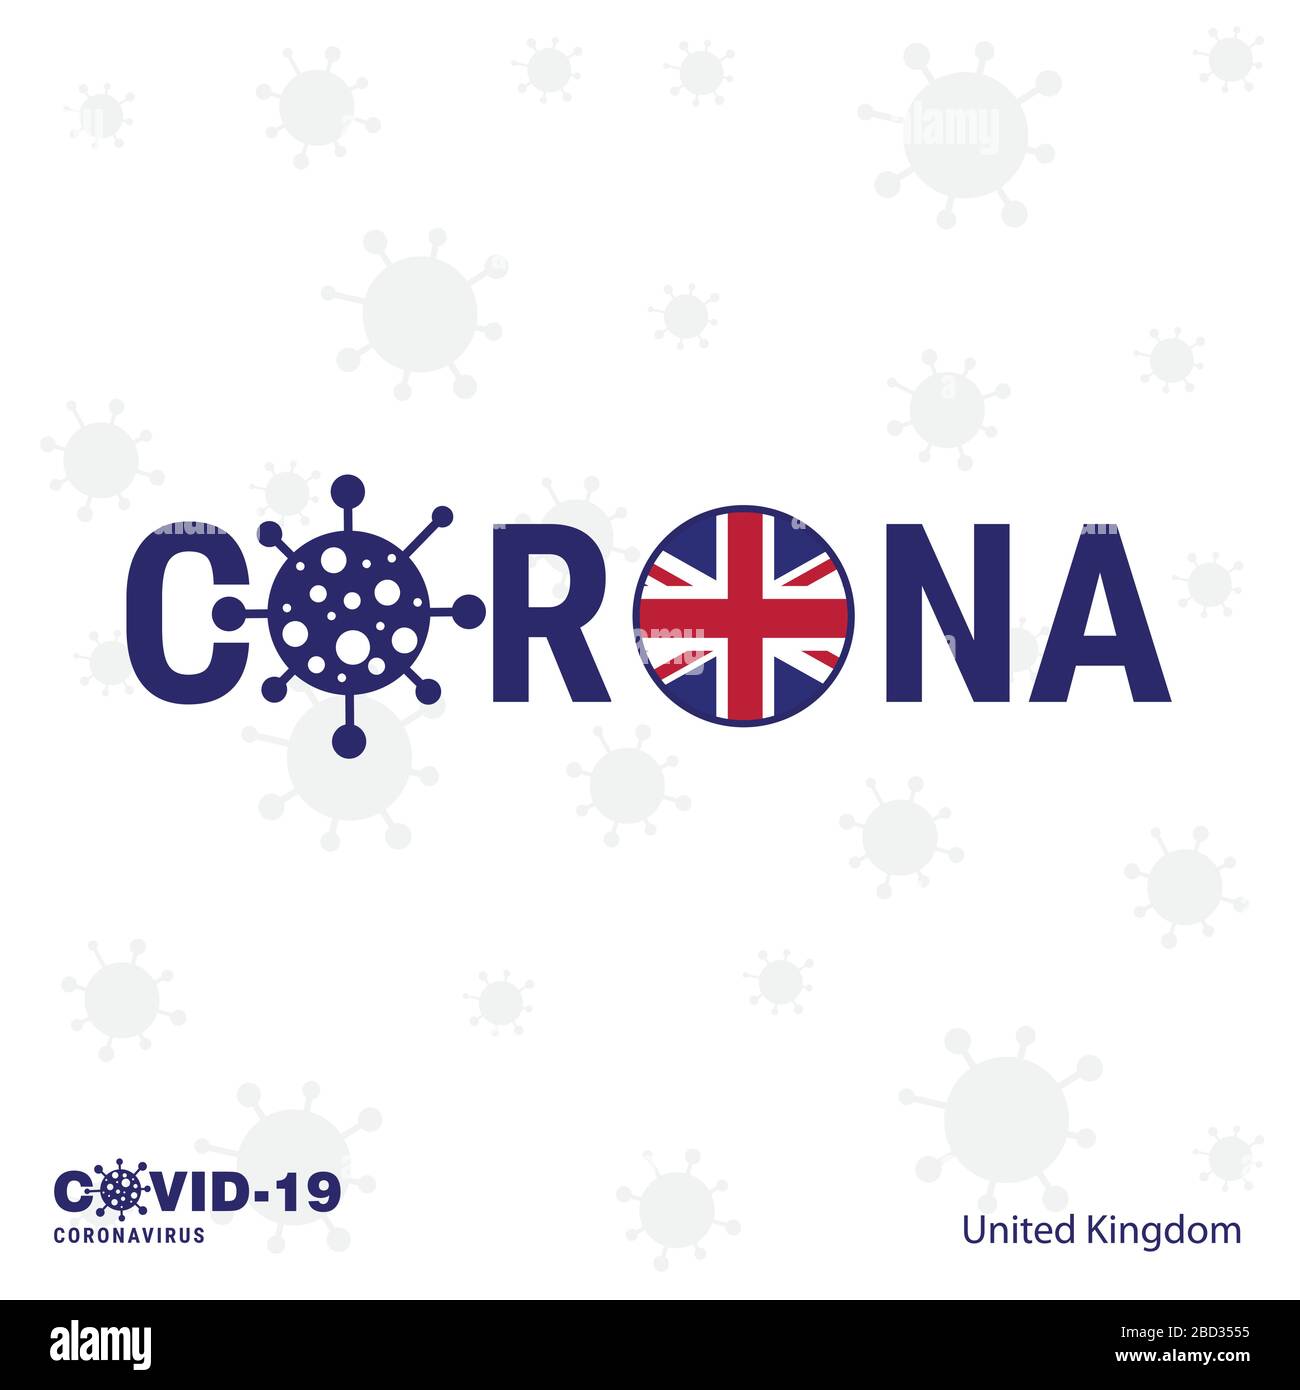 United Kingdom Coronavirus Typography. COVID-19 country banner. Stay home, Stay Healthy. Take care of your own health Stock Vector